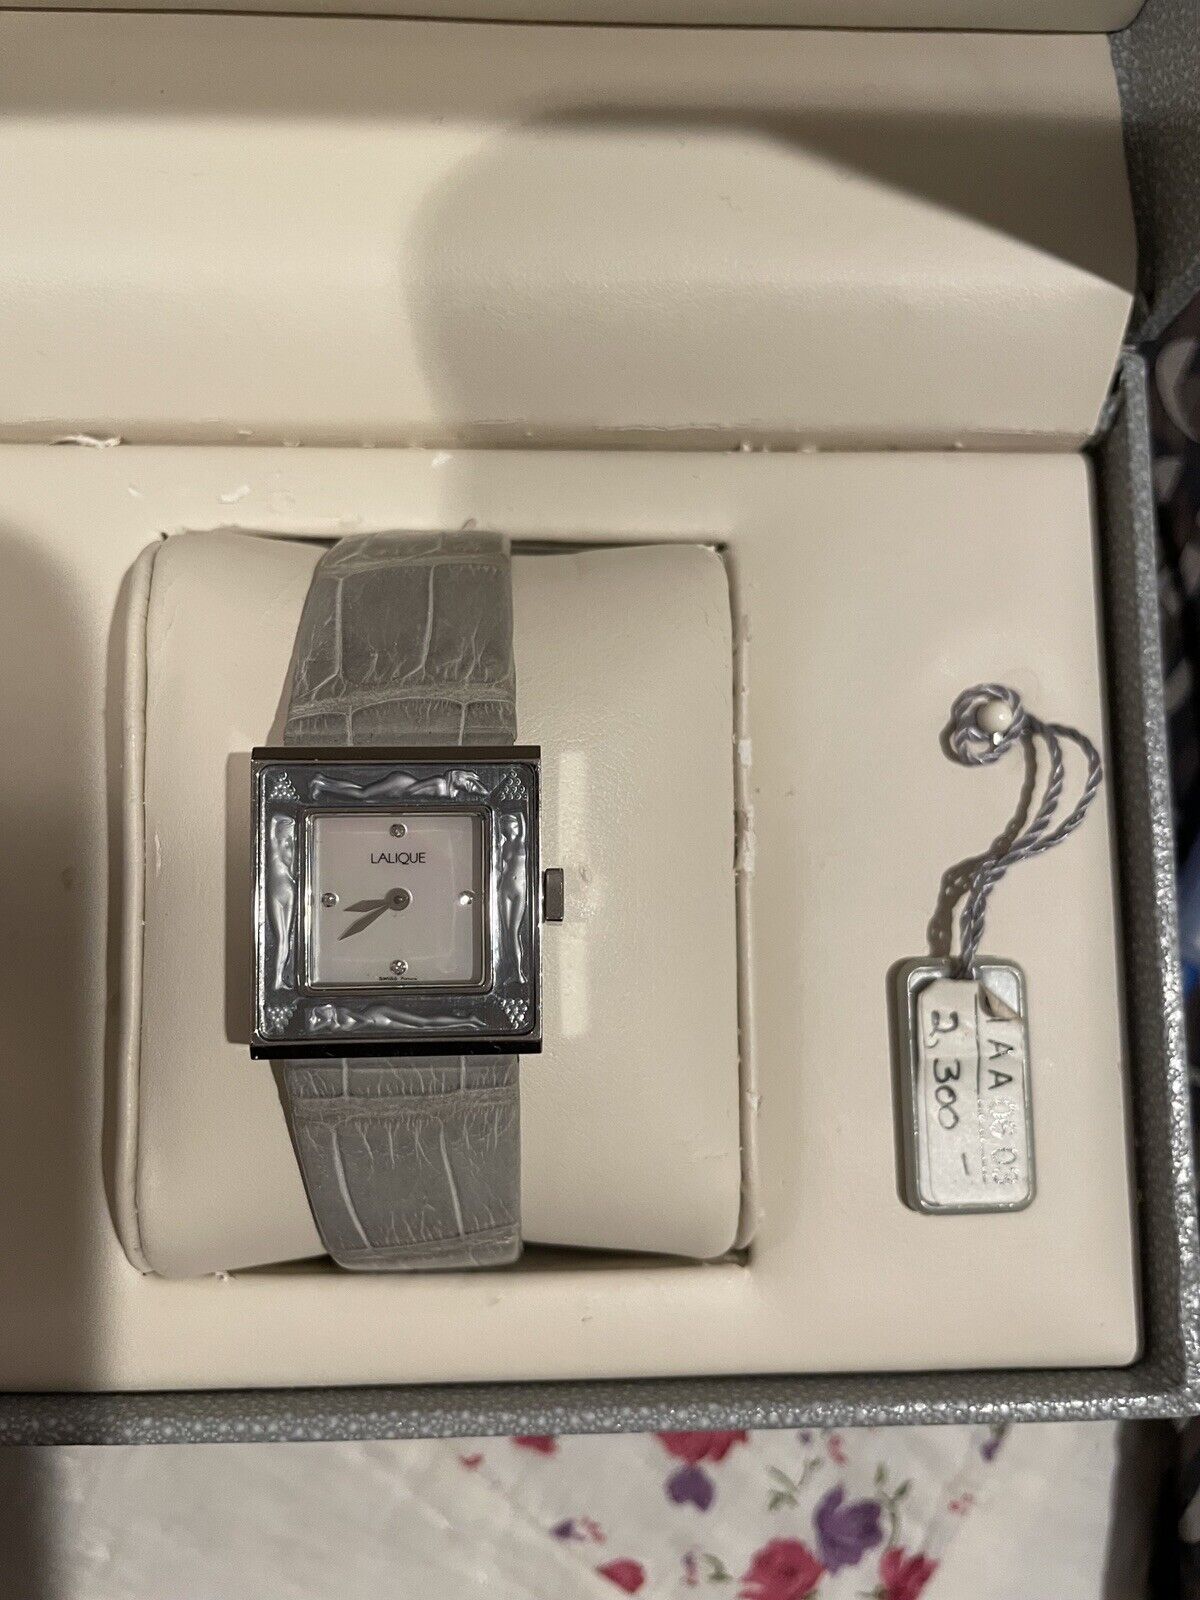 Lalique watch - Great Condition - Original Box and Tag - Gray Gator Print Band